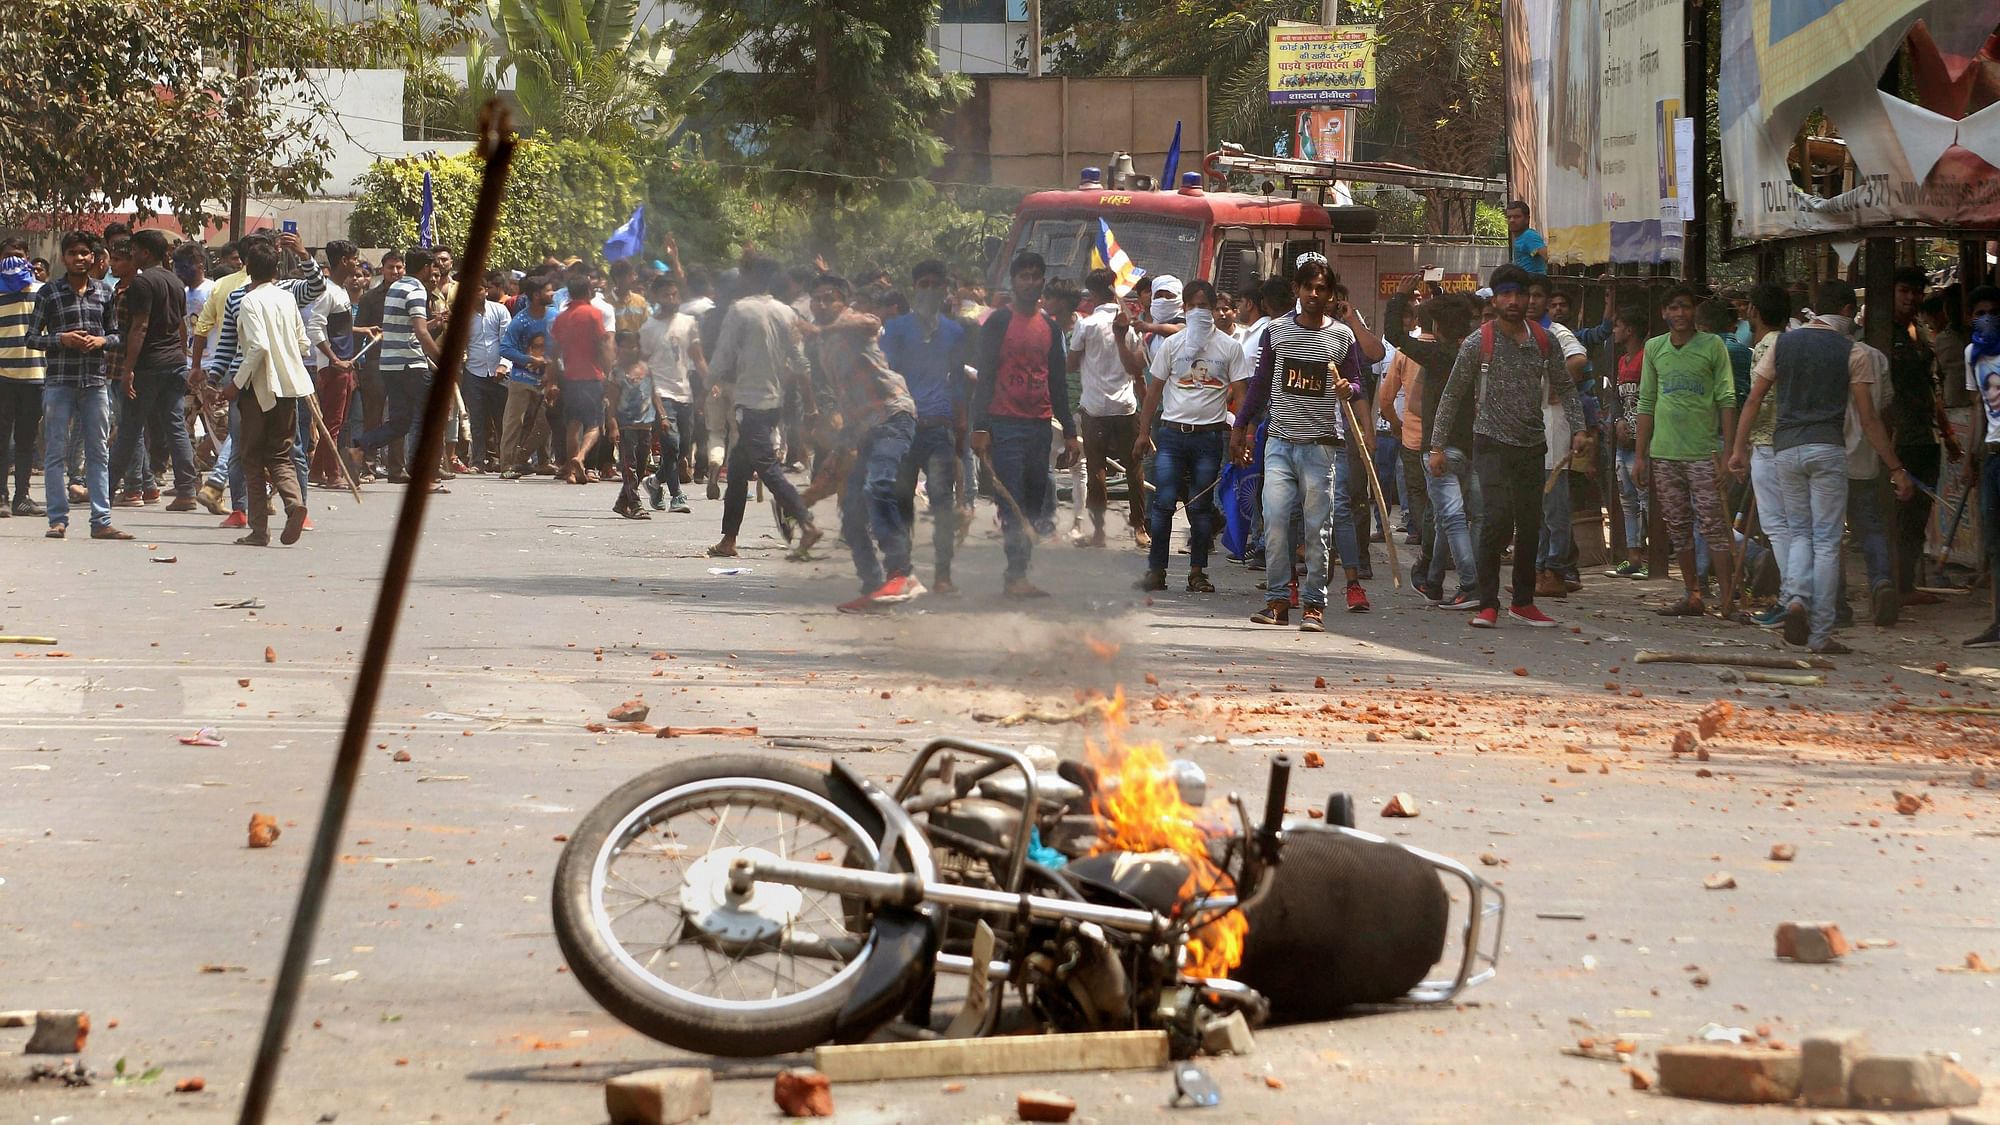  A bike set on fire by a group of protesters during Bharat Bandh call given by Dalit organisations against the alleged dilution of the SC/ST Act, in Meerut on 2 April 2018.